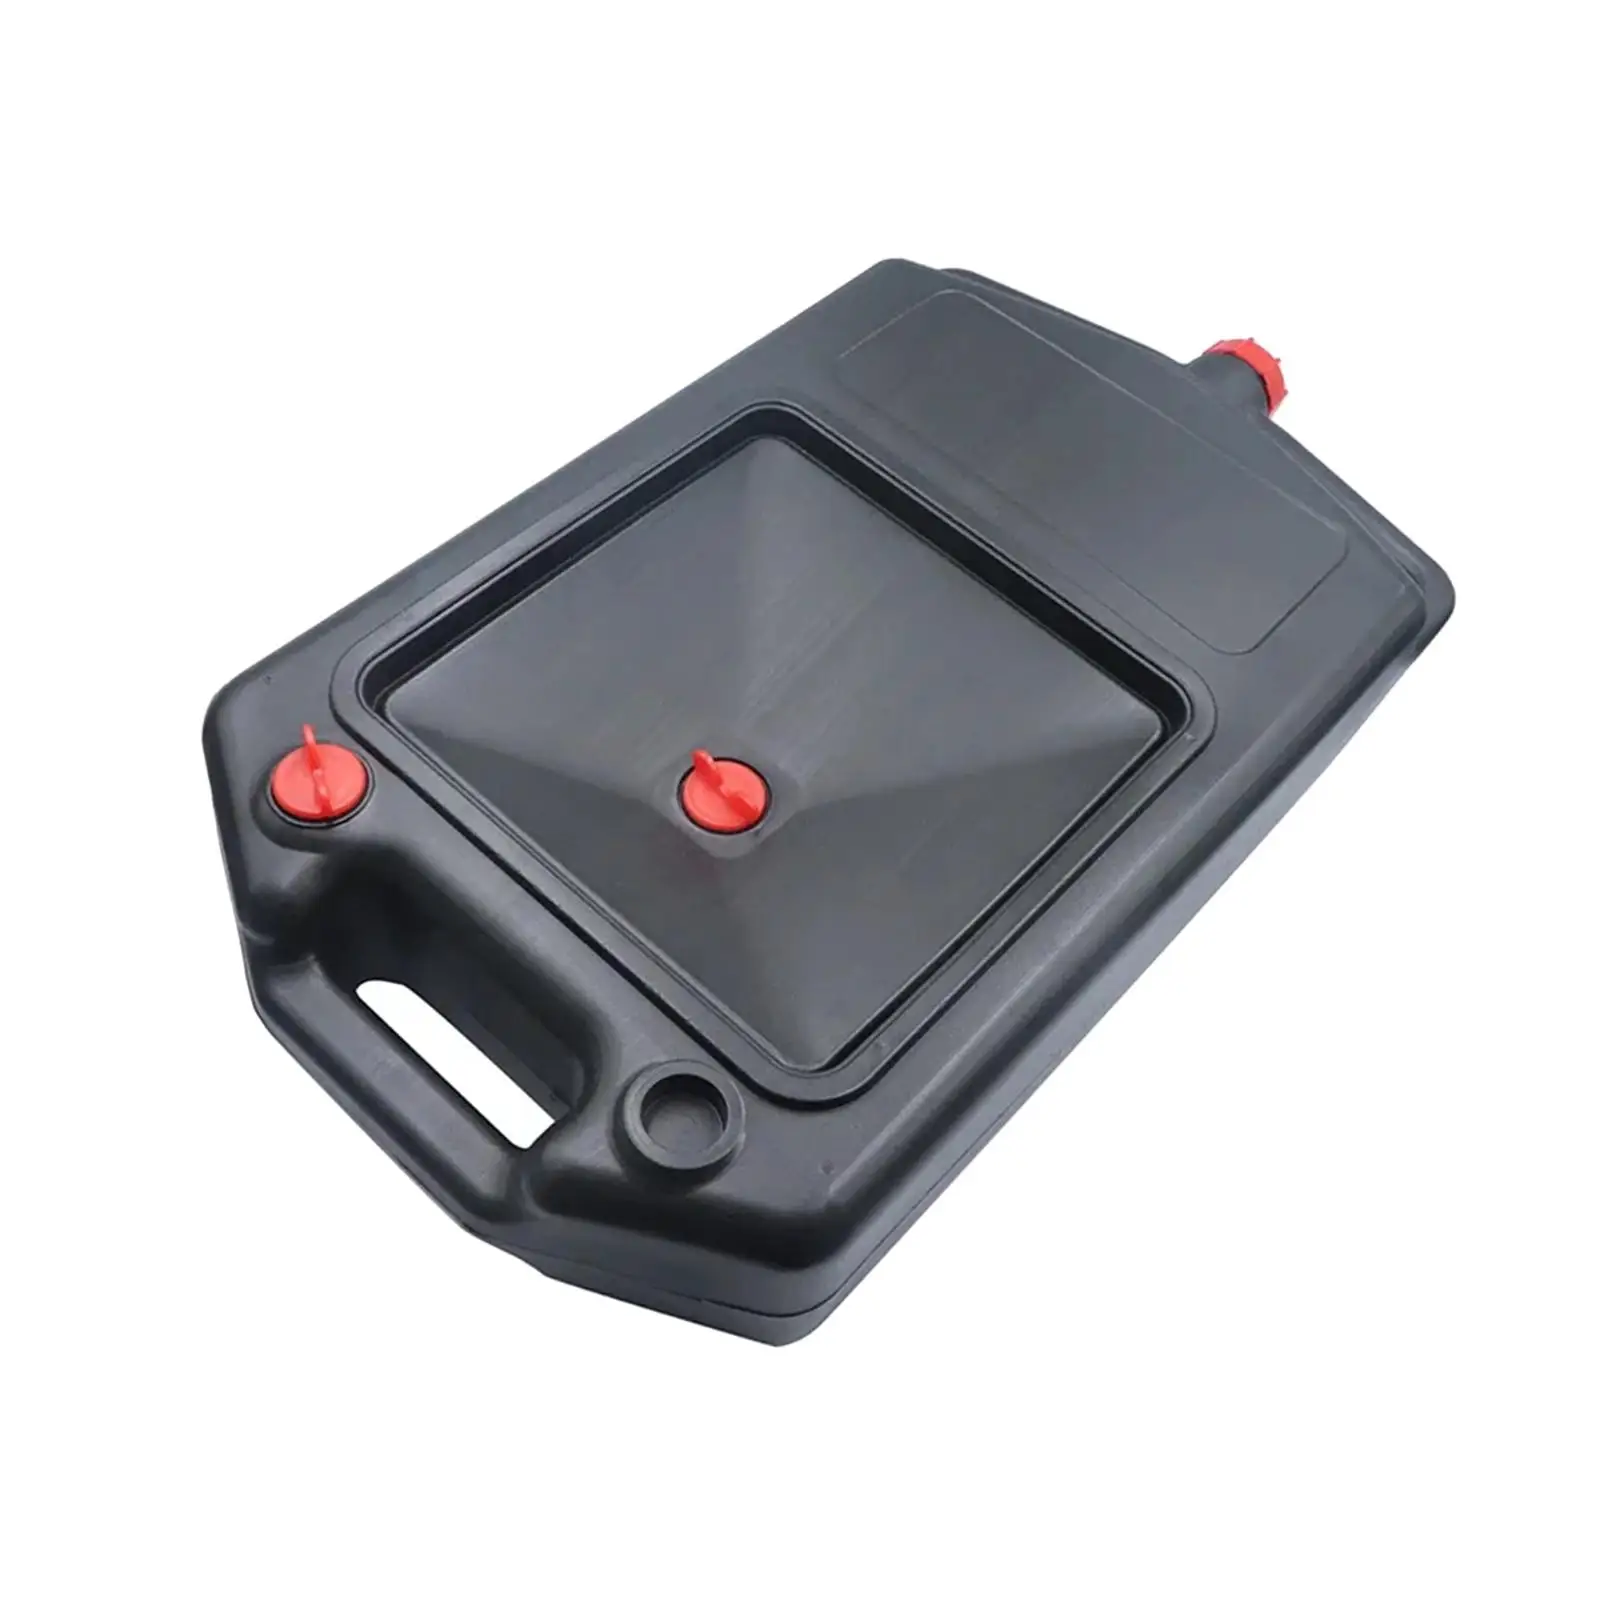 Oil Drain Container Garage Tool Car Oil Change Pan for Cars Workshop 10 L